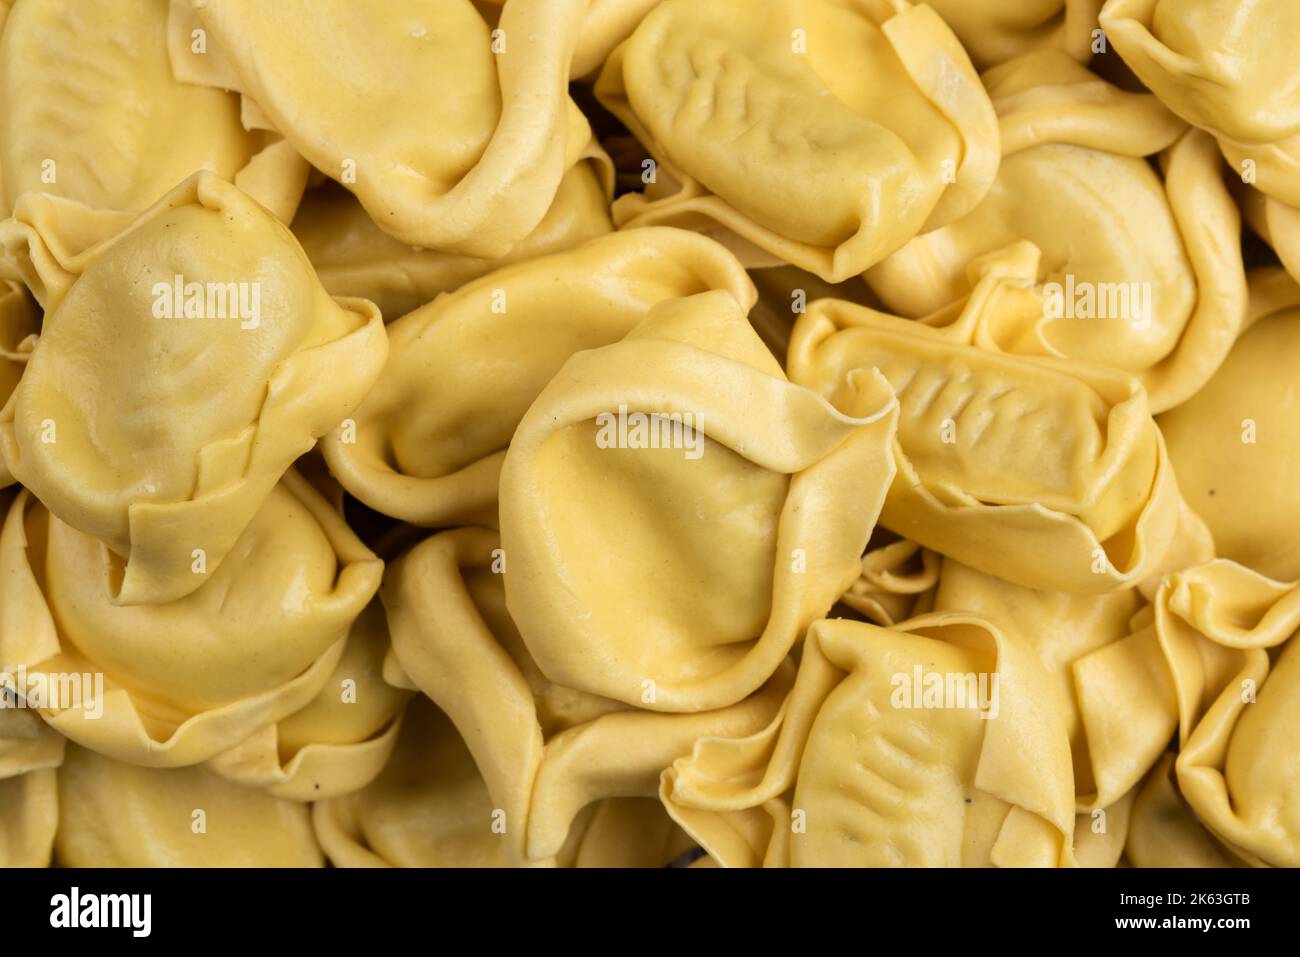 tasted italian food. Quantity of ravioli pasta as a background. Top view style Stock Photo